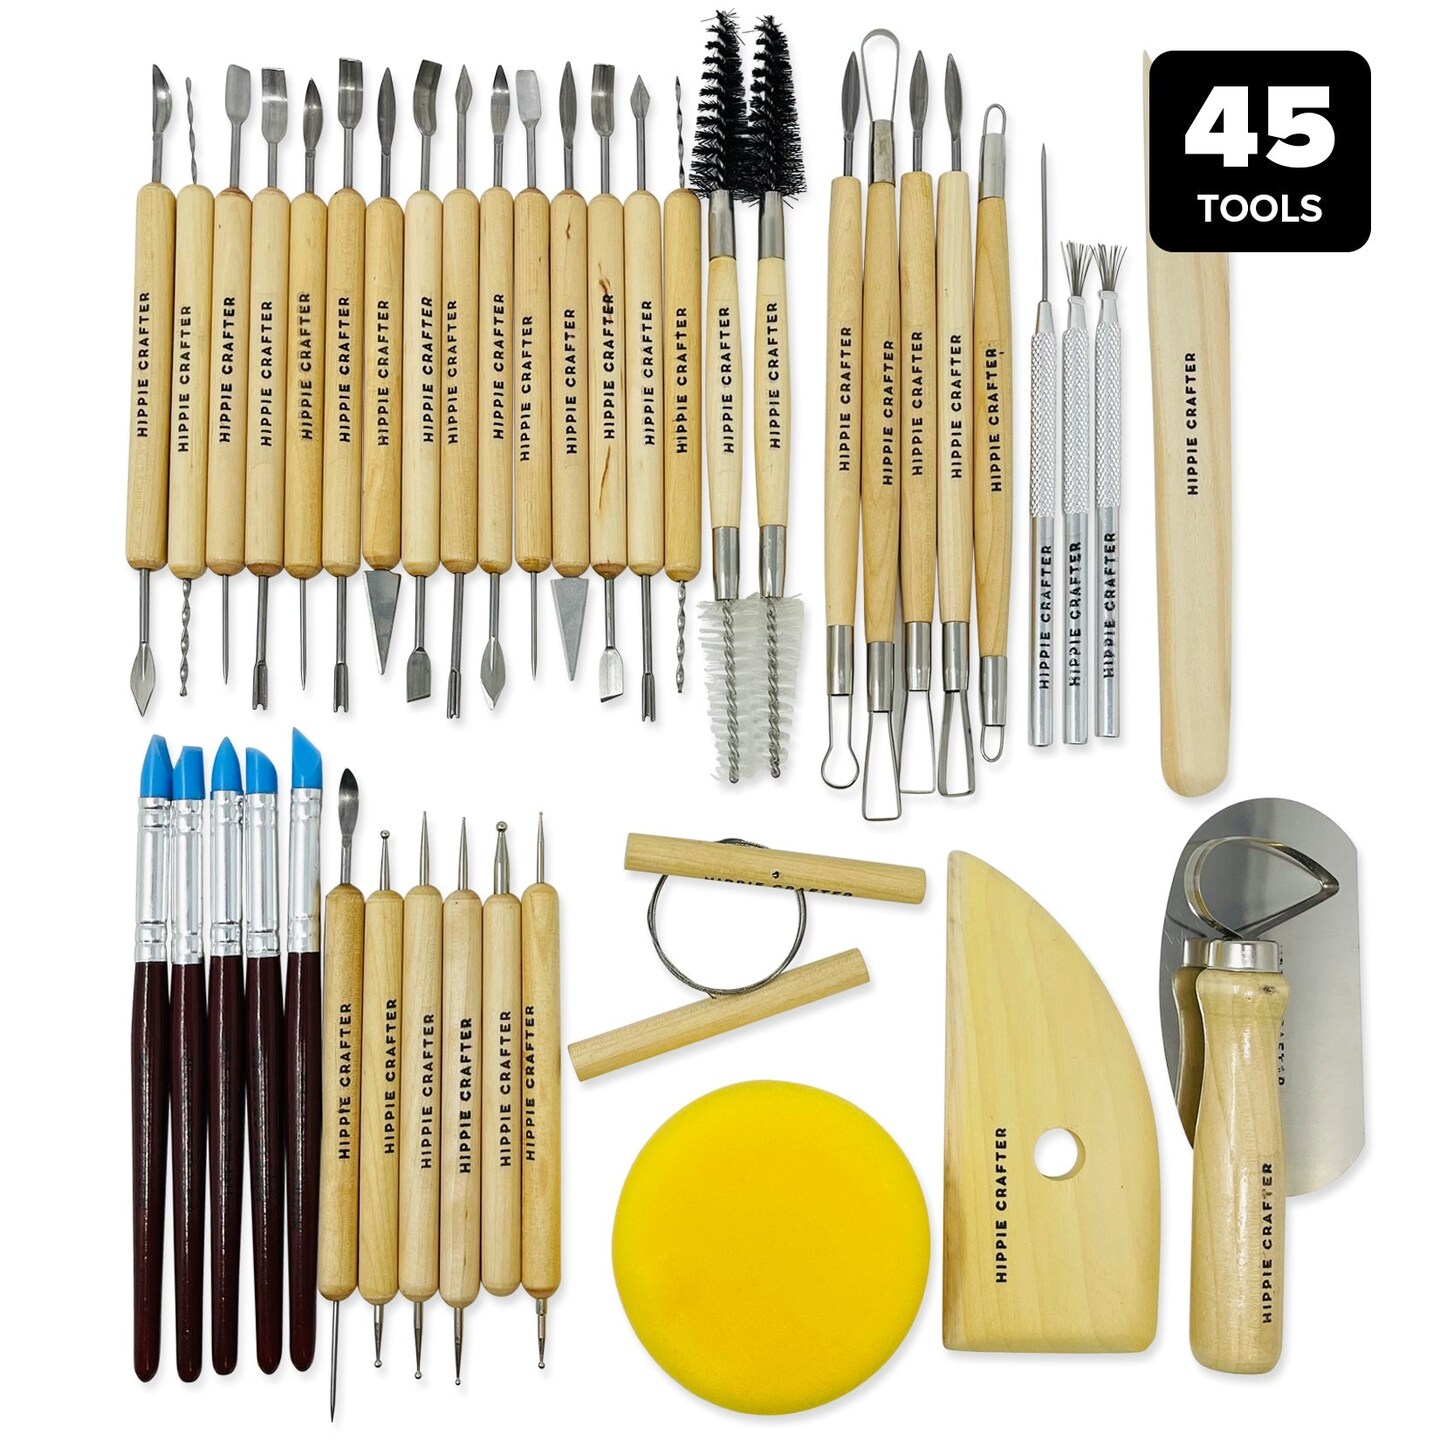 Pottery Tool Kit and Polymer Clay Tools Set for Modeling Sculpting Carving Tool Kit - 45 Pieces Ceramic Tools for Pottery Clay Sculpting Tools and Shaping Supplies Wood and Metal